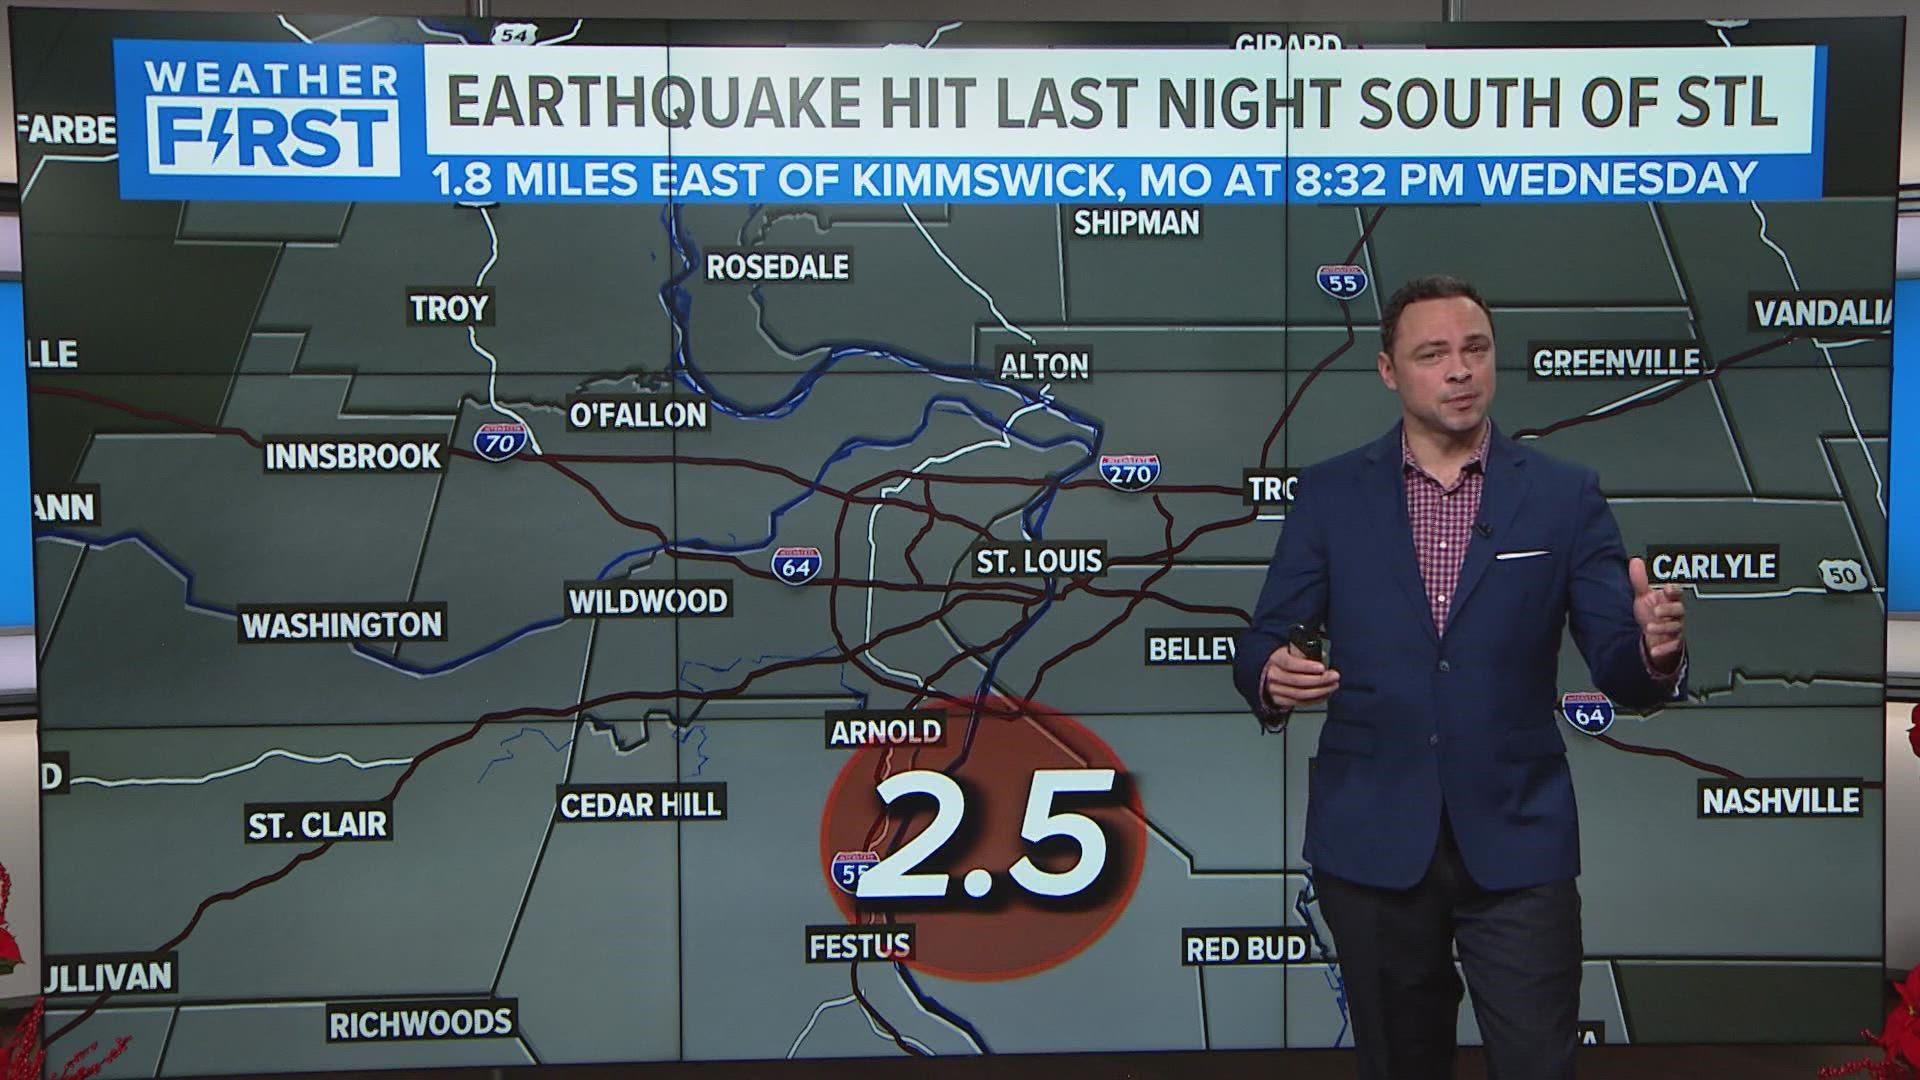 Anthony Slaughter shares the details of an earthquake Tuesday night. The quake registered in Illinois, east of Kimmswick, Missouri.